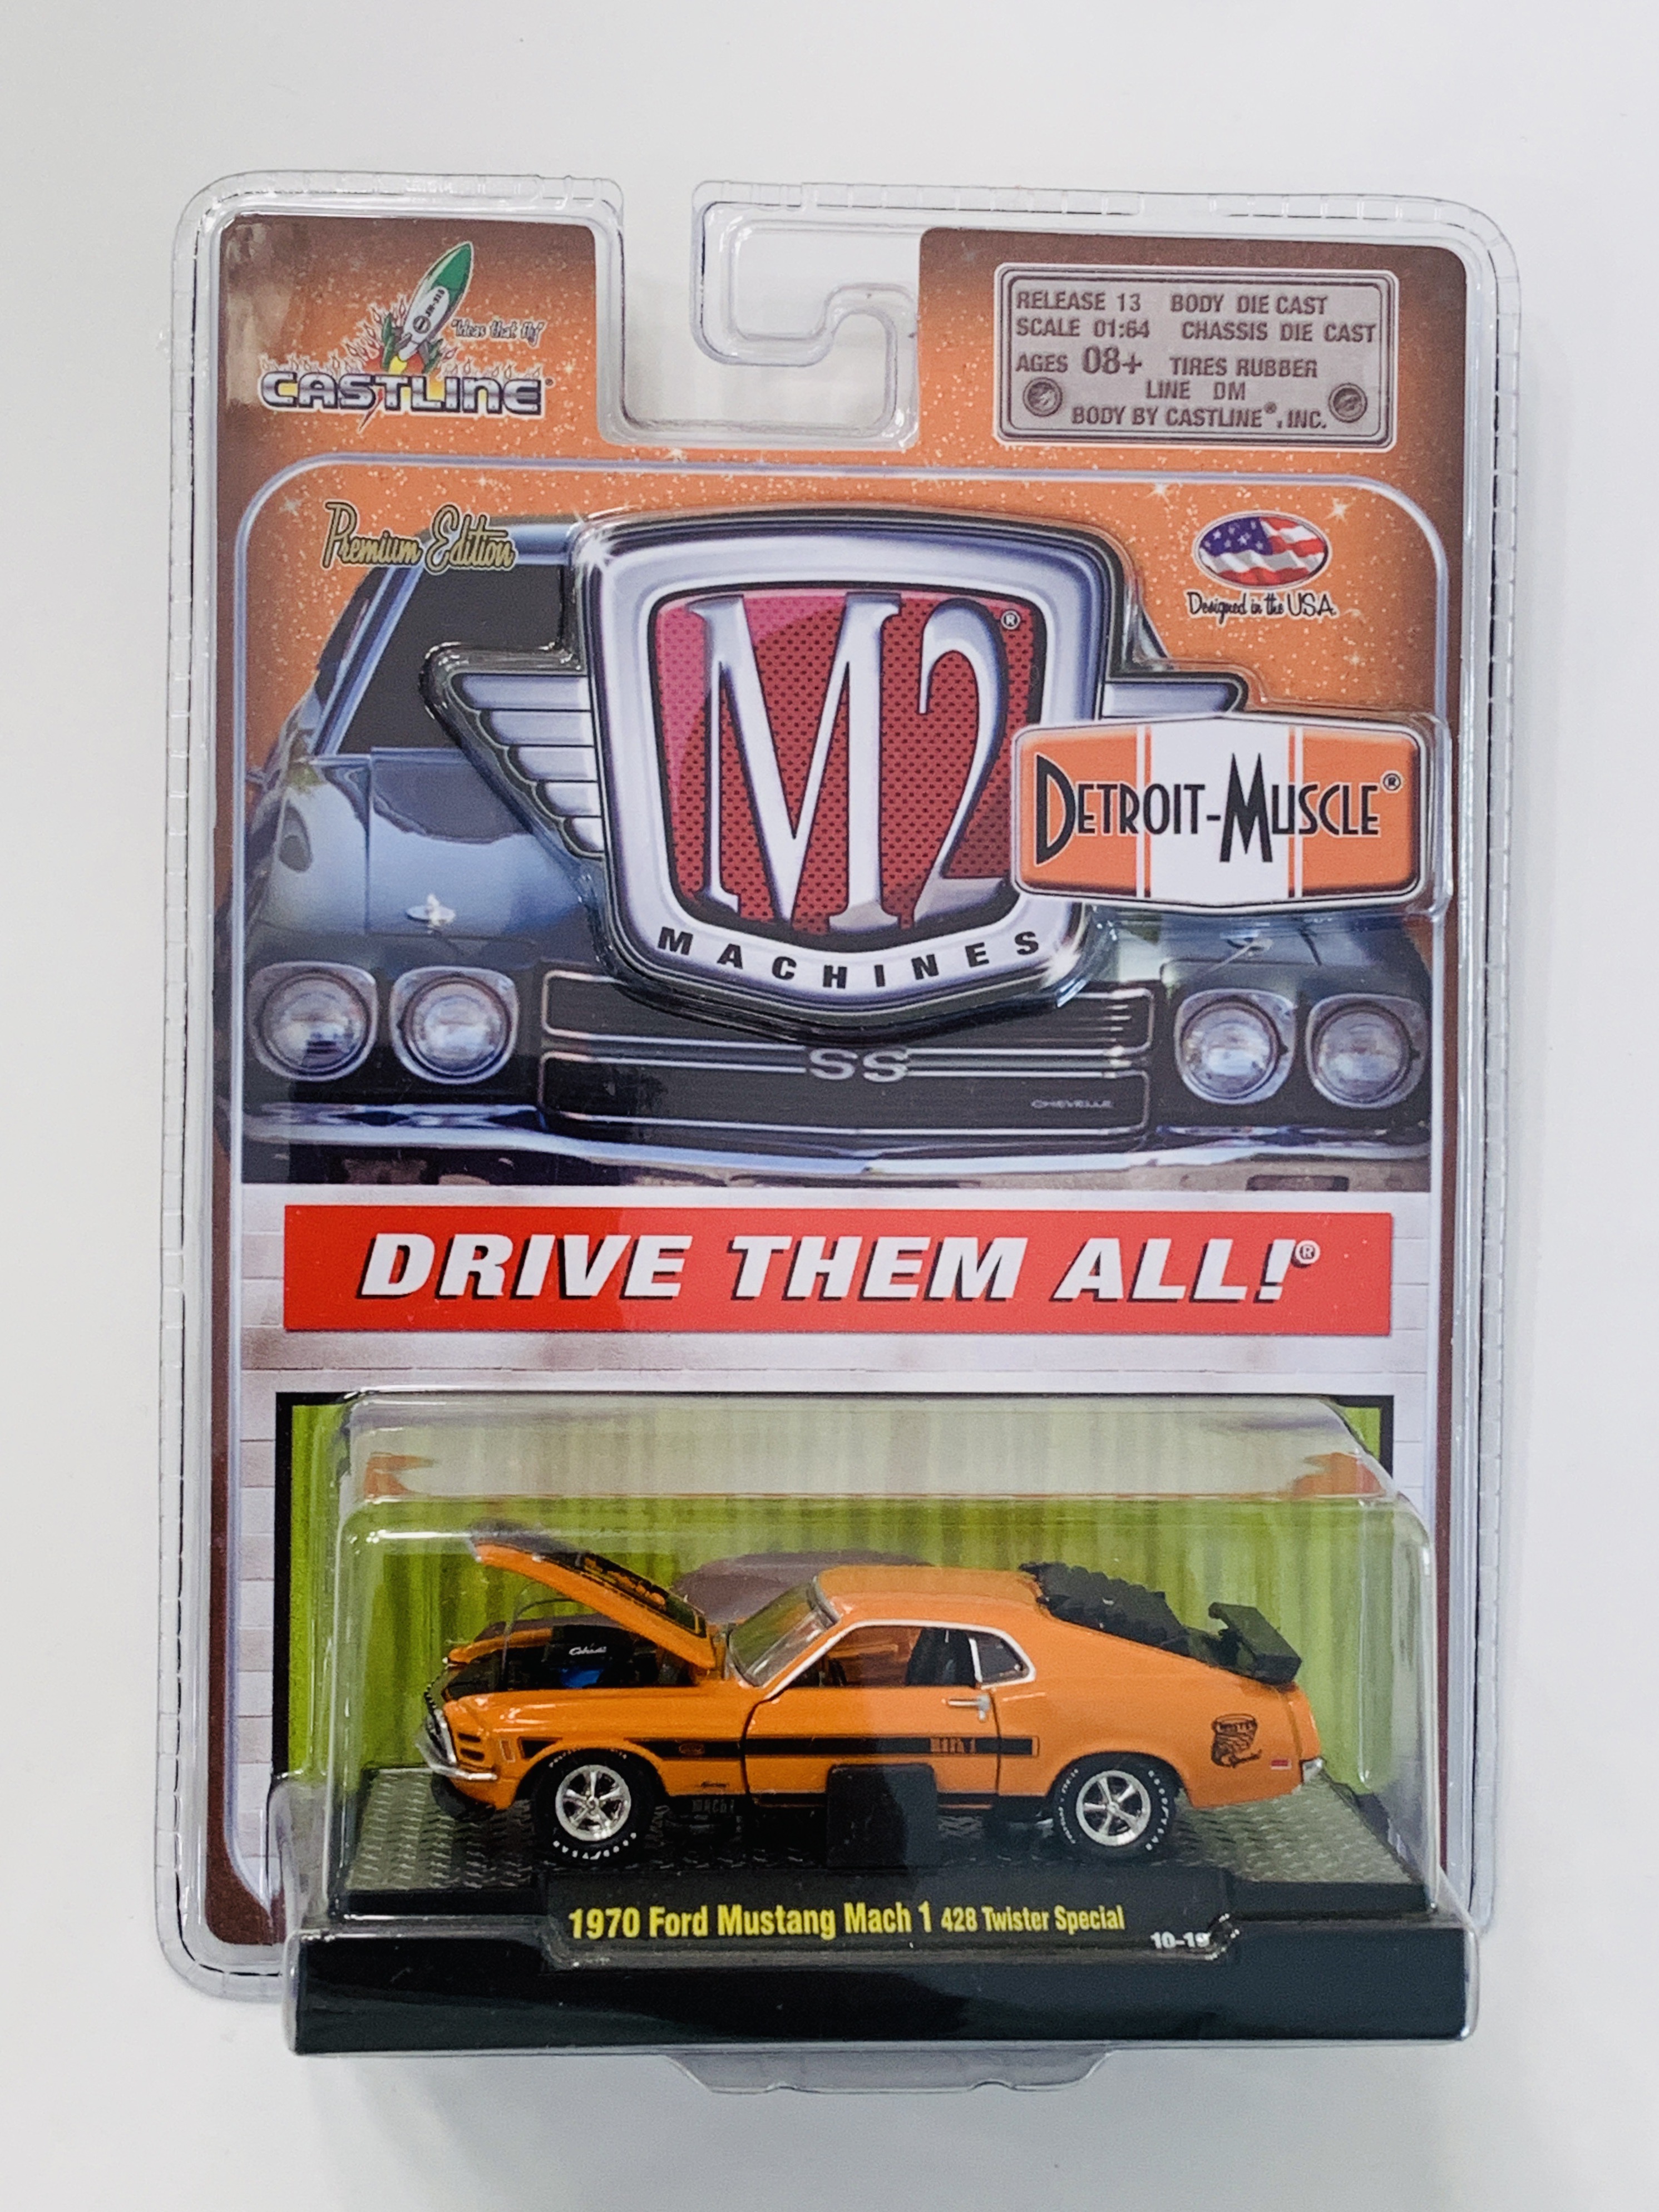 M2 Machines Detroit-Muscle 1970 Ford Mustang Mach 1 428 Twister Special R13